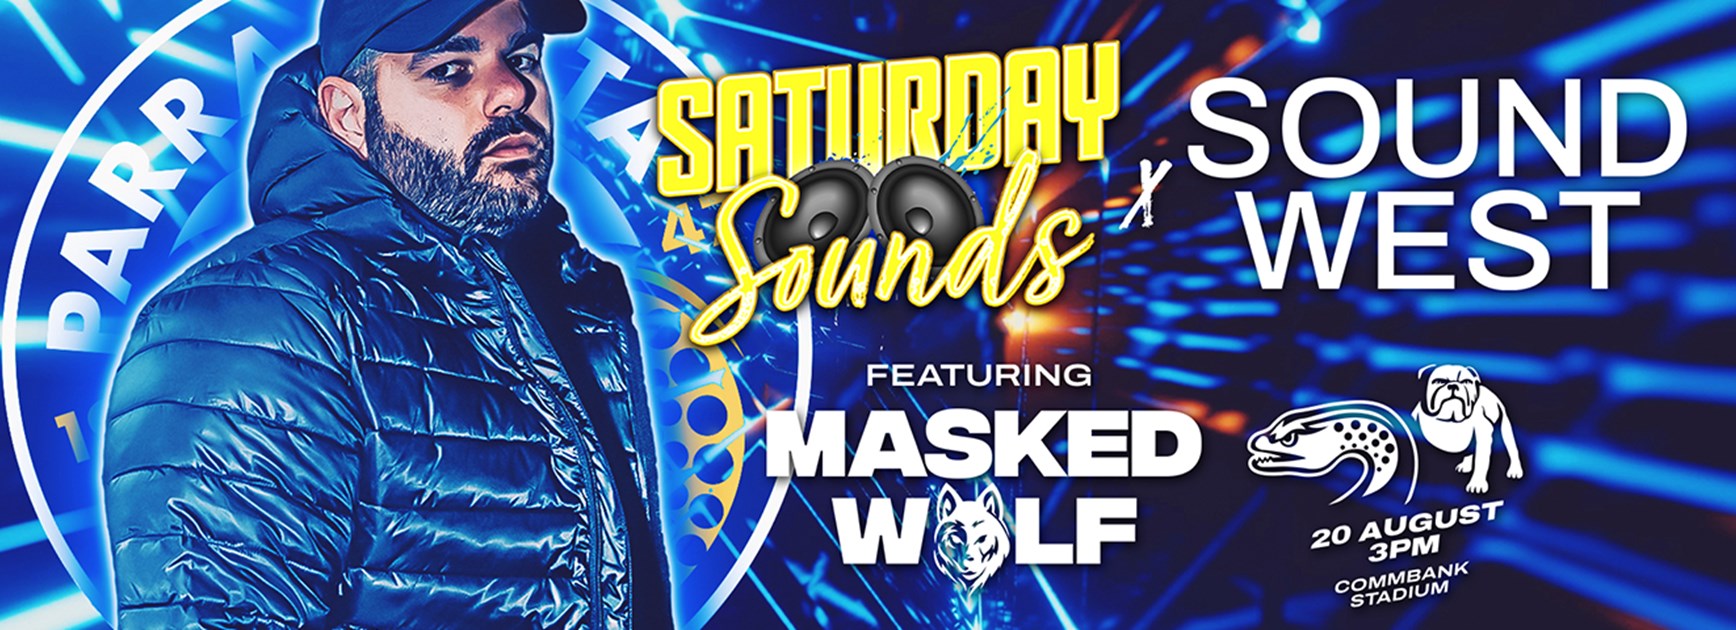 Saturday Sounds x Sound West feat. Masked Wolf